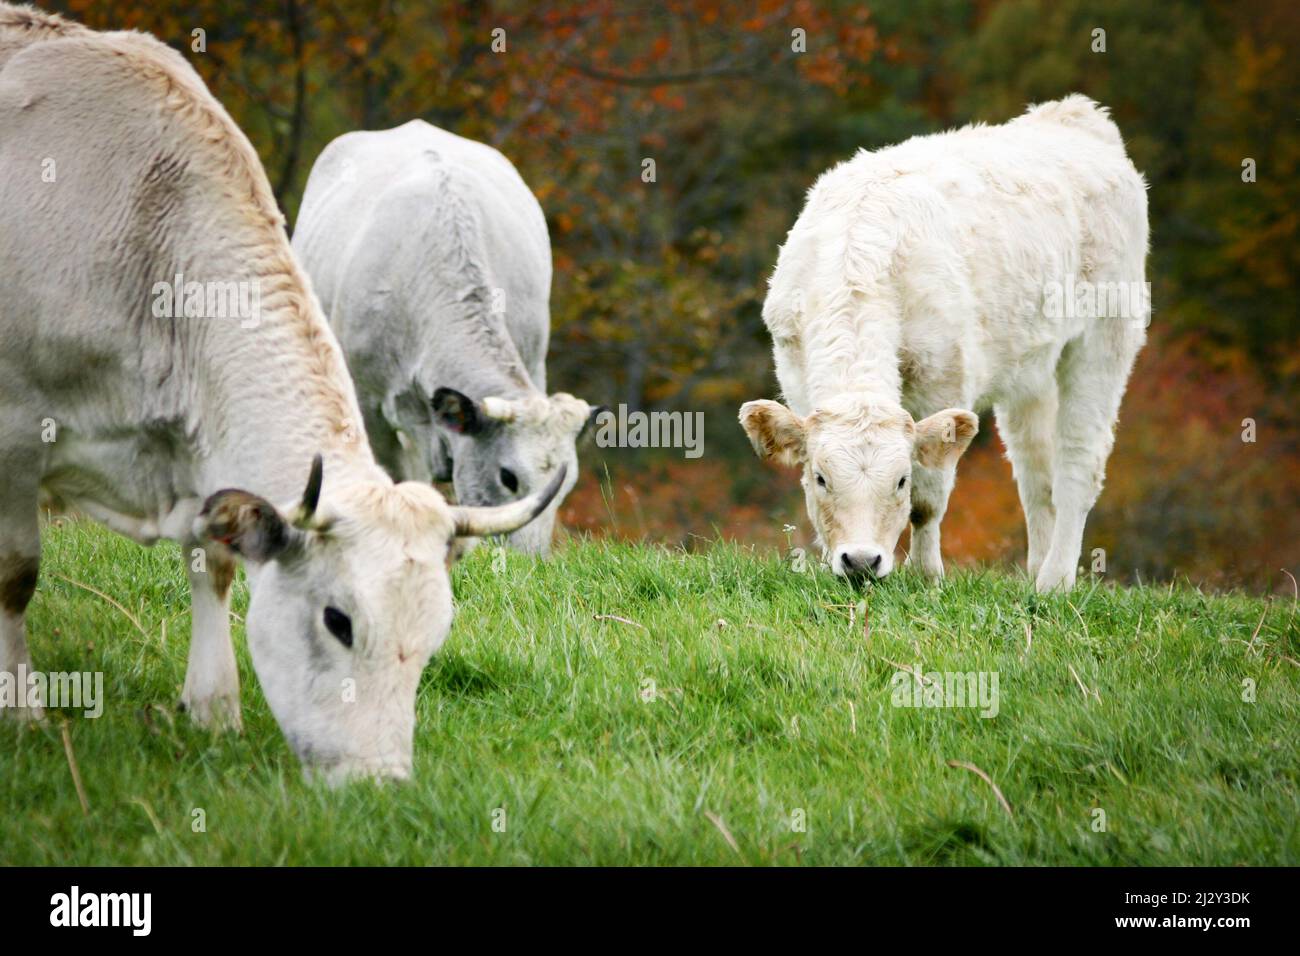 Cows grazing. A tranquil rural scene as dairy cows feed on fresh grass growing in a paddock. Stock Photo